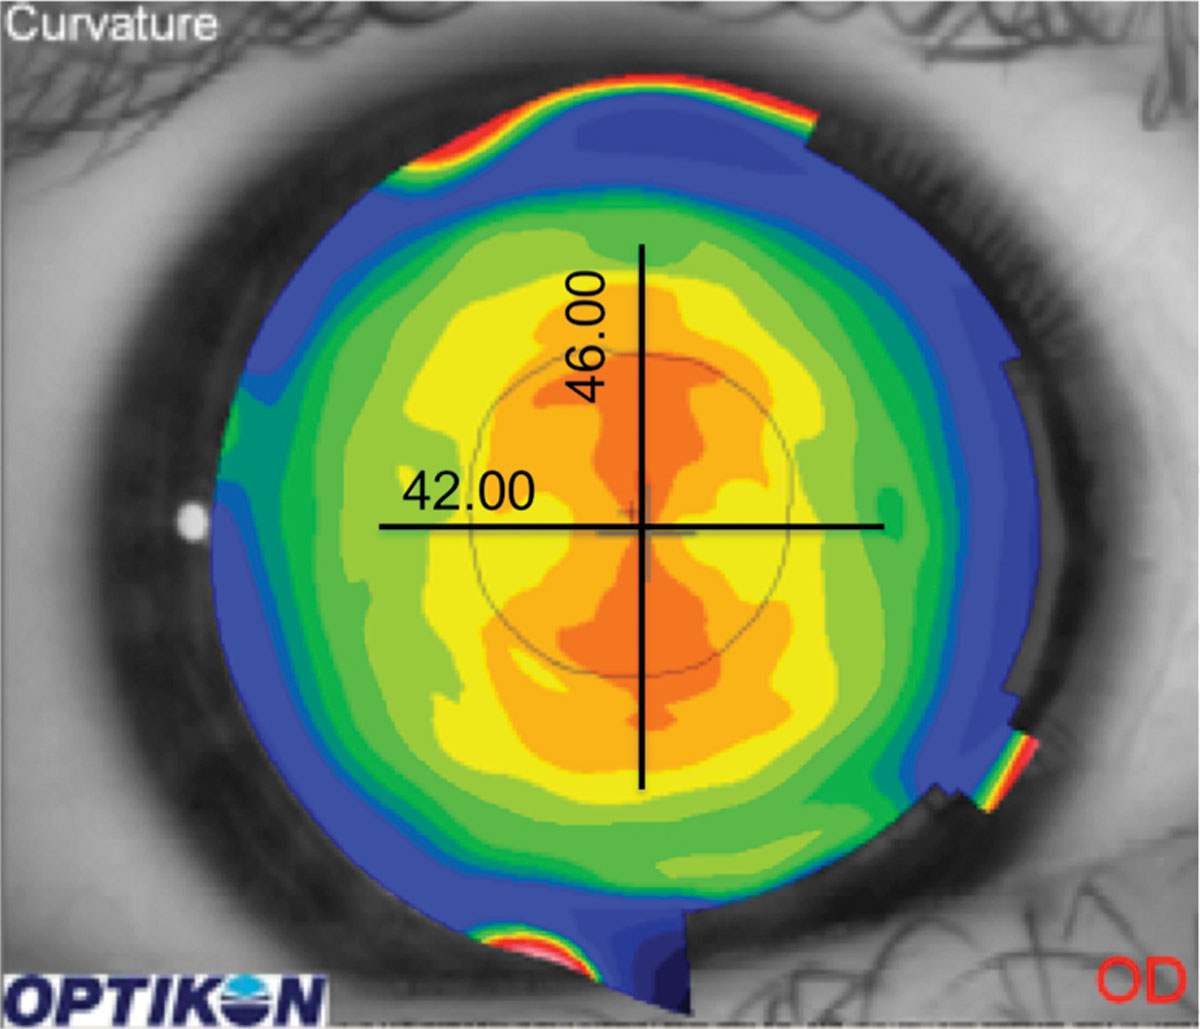 Centrally located astigmatism can often be fit with a spherical GP lens.